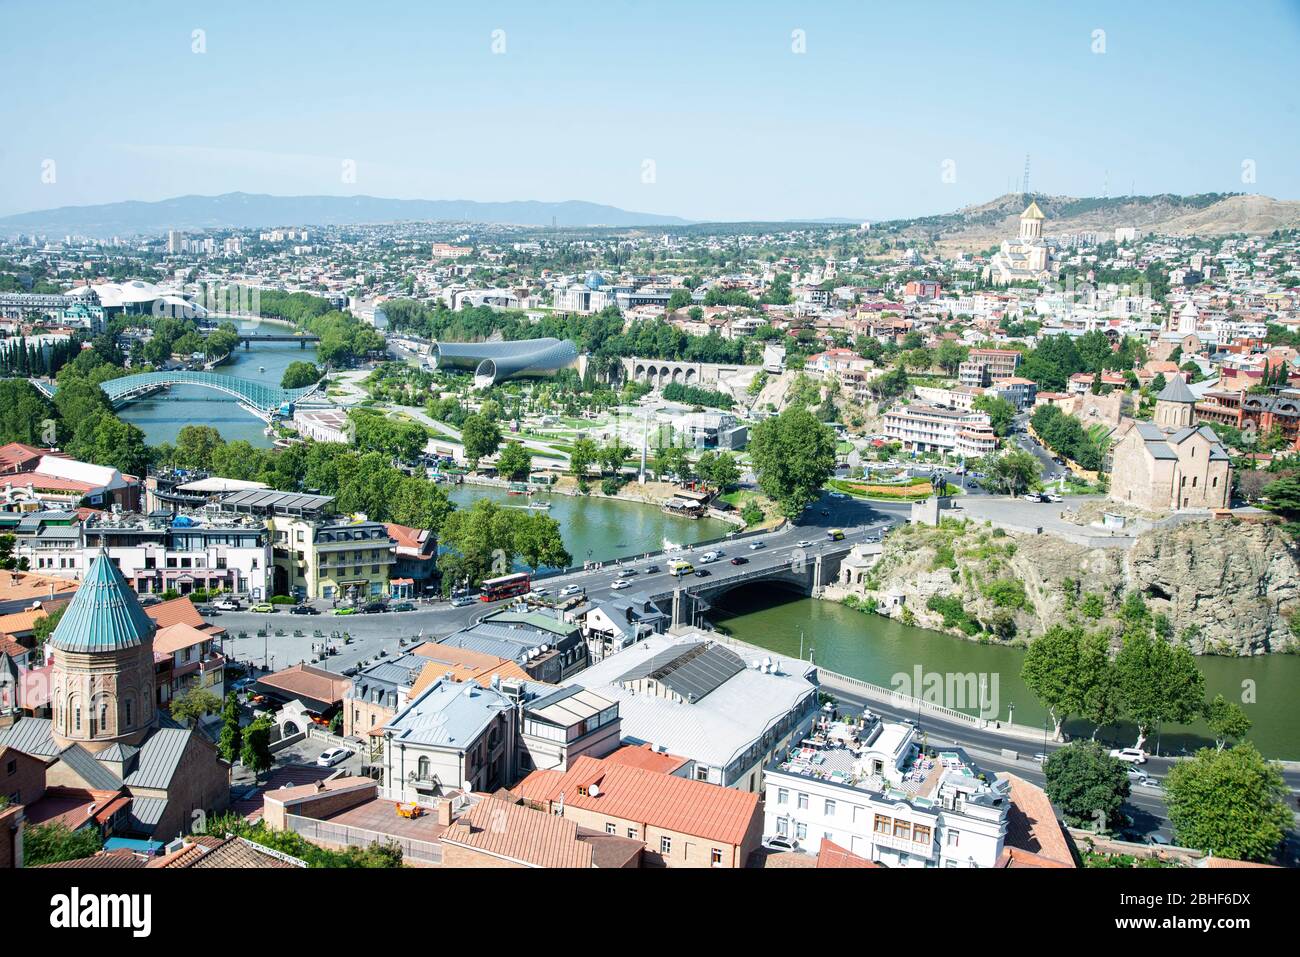 Cityscape of Tbilisi, view on the old town, river Kura and the Bridge of Peace, Georgia Stock Photo